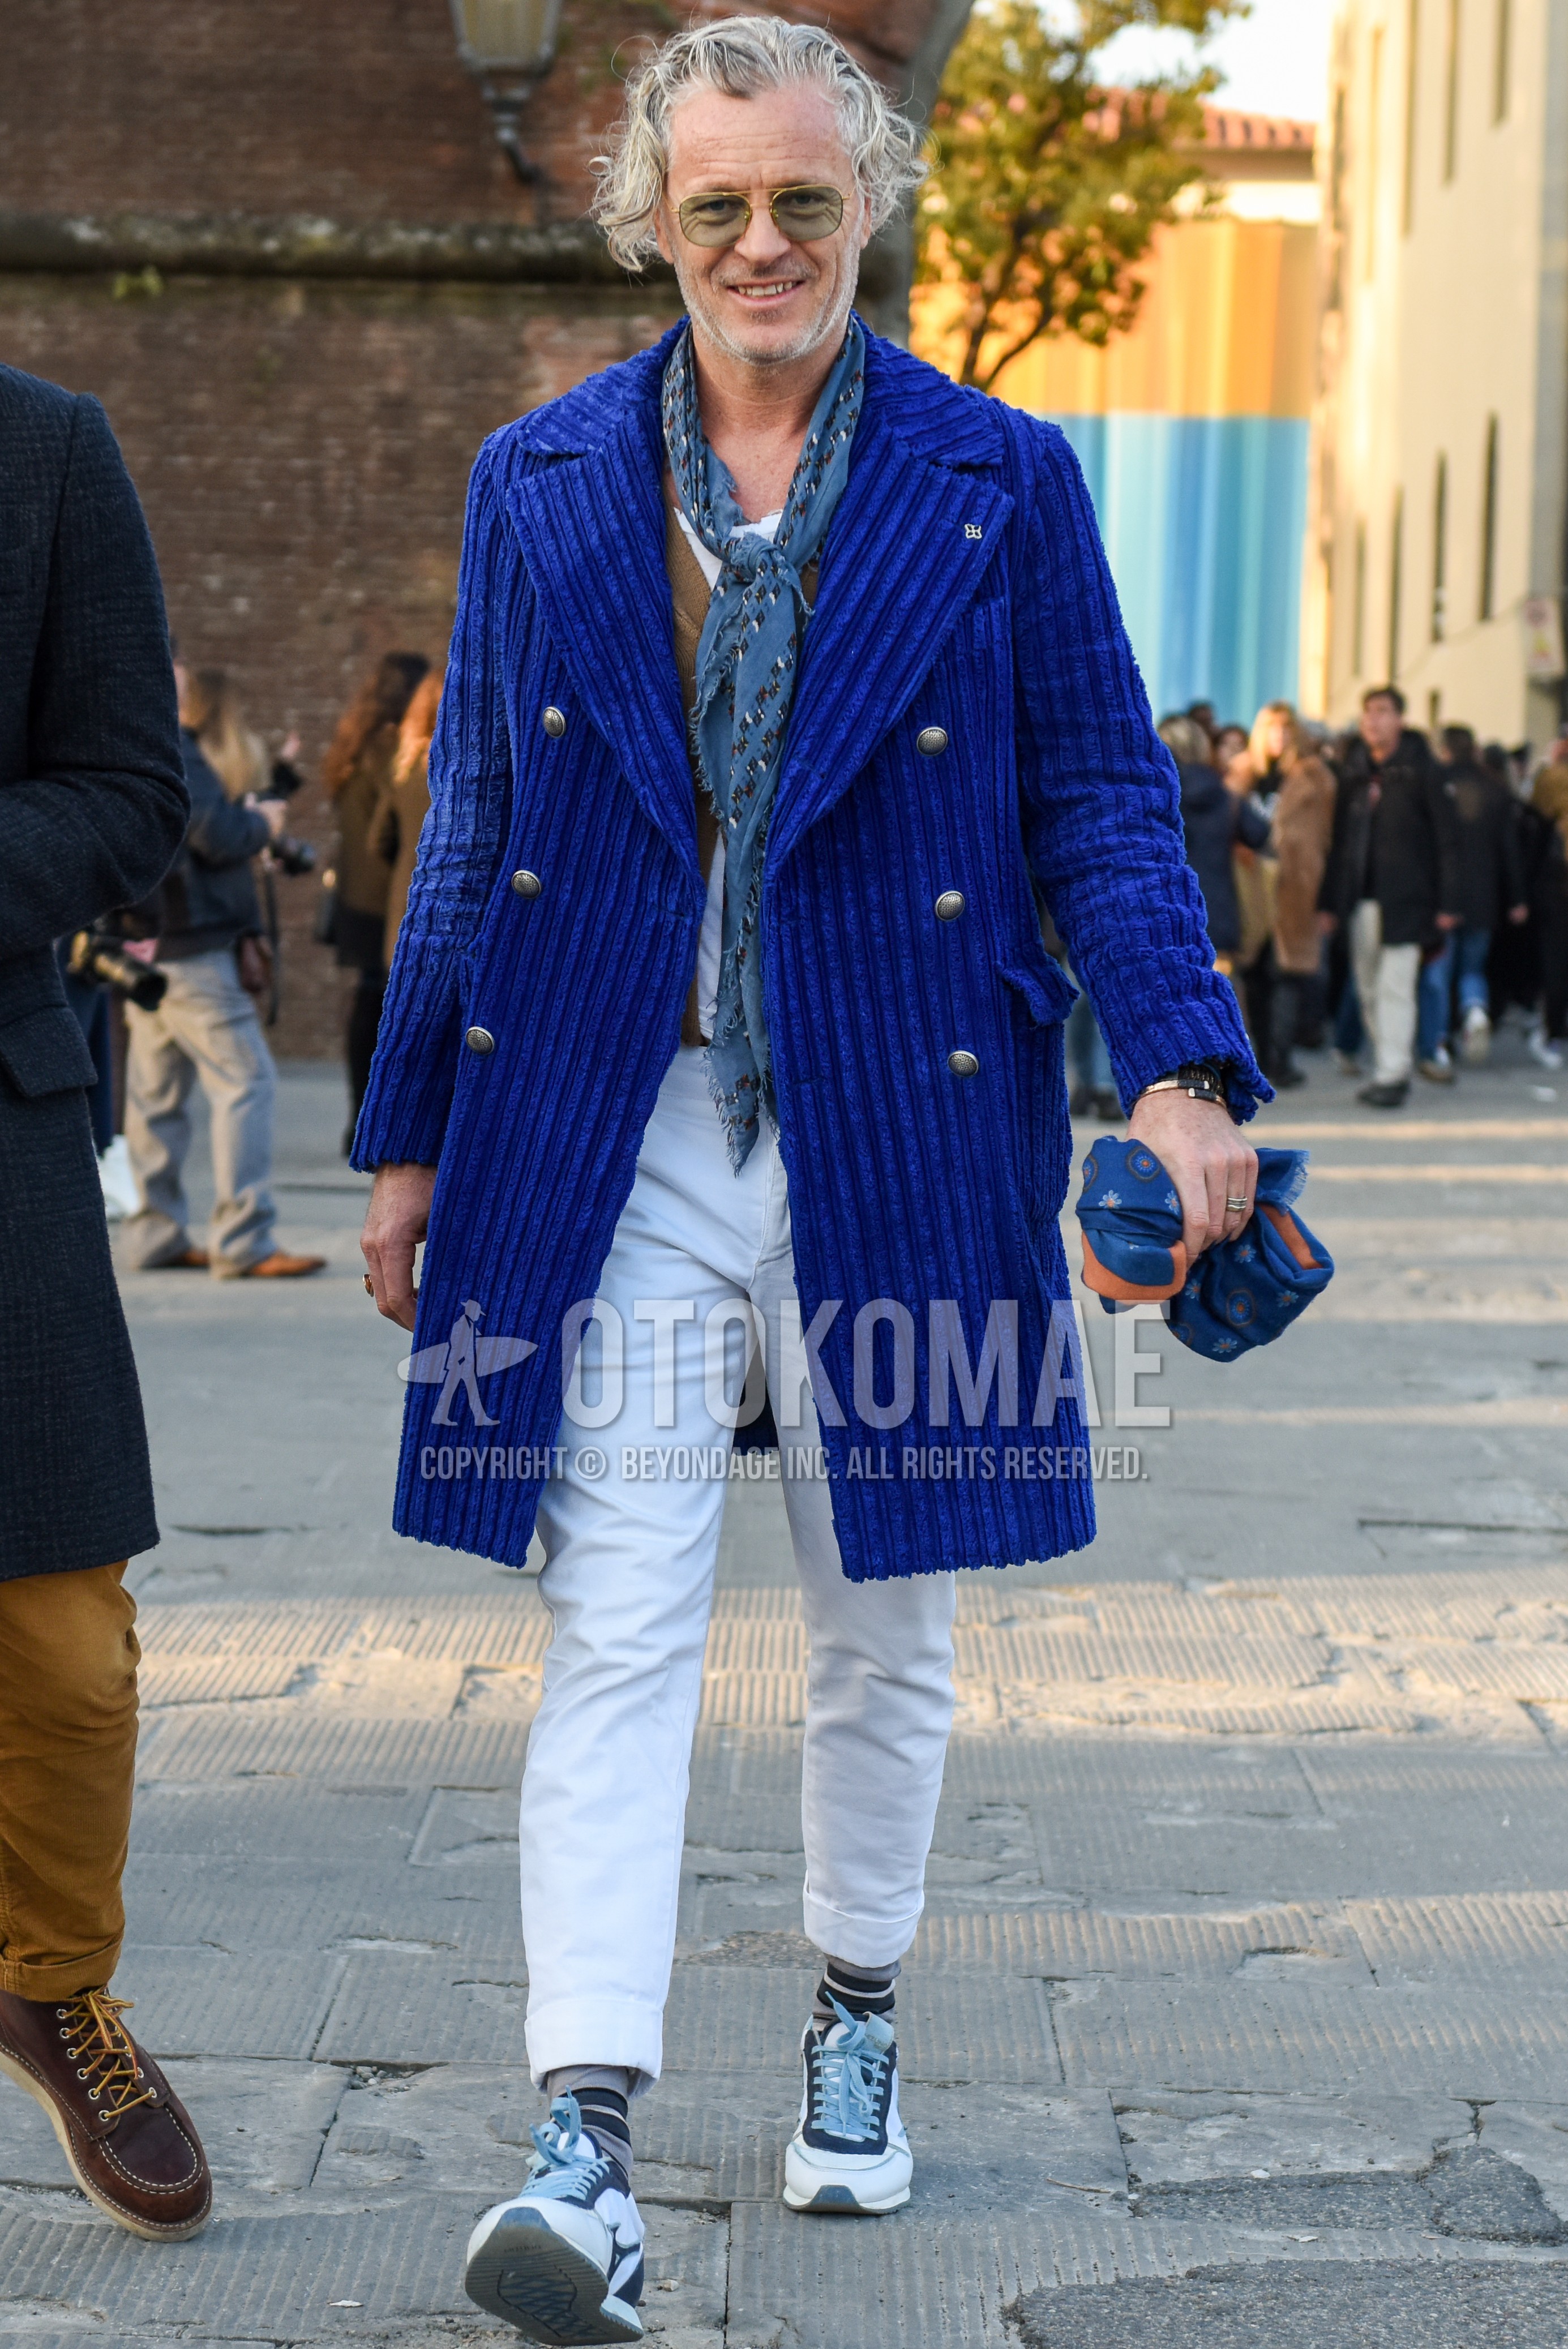 Men's autumn winter outfit with gold plain sunglasses, gray scarf scarf, blue plain ulster coat, beige plain cardigan, white plain t-shirt, white plain cotton pants, white plain cropped pants, white navy low-cut sneakers.